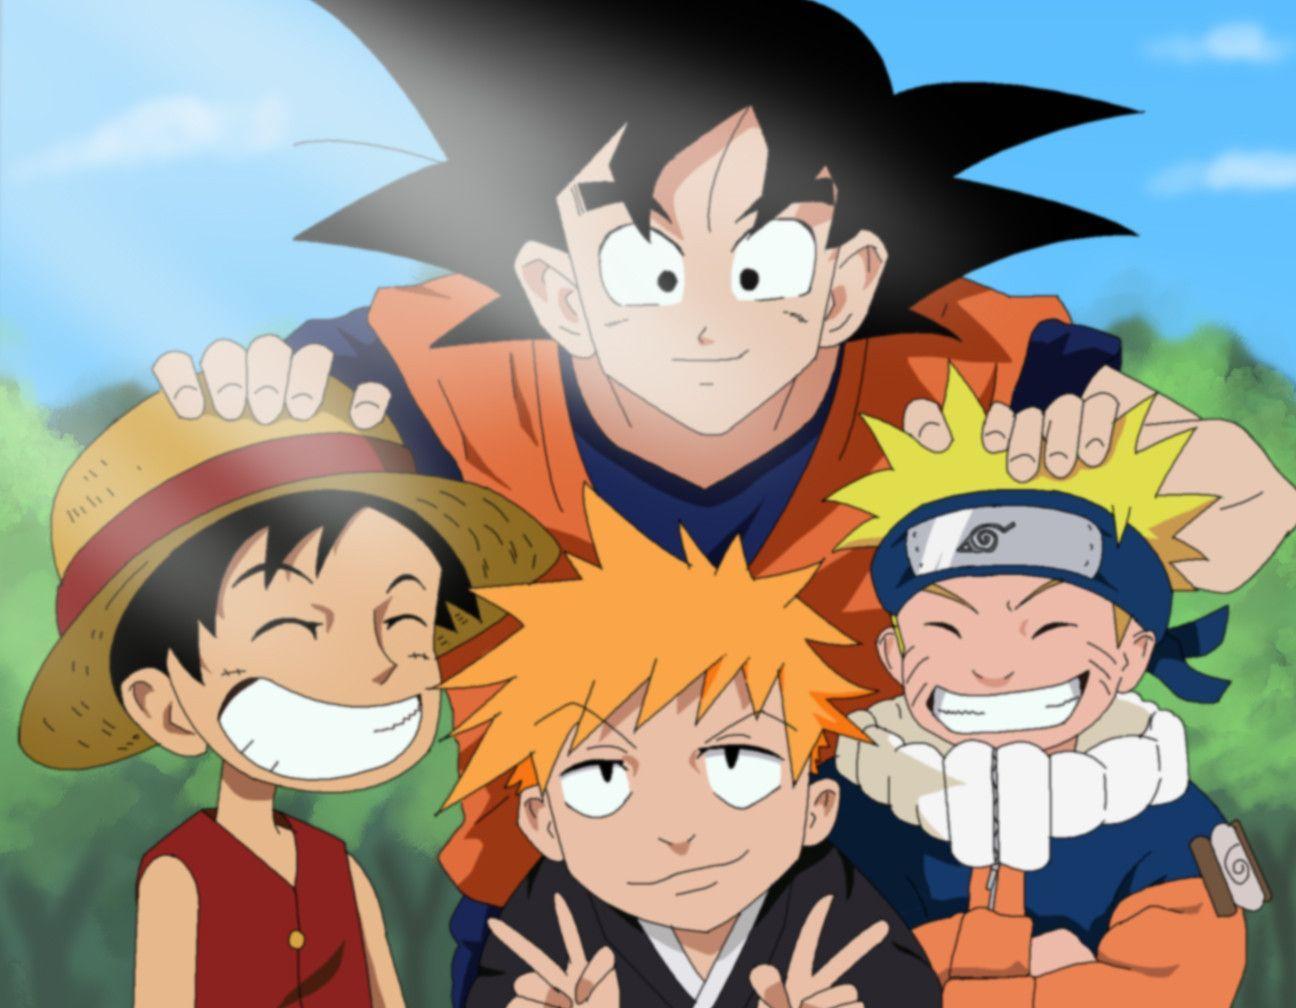 Naruto Joins One Piece and Bleach for a Big Three Comeback